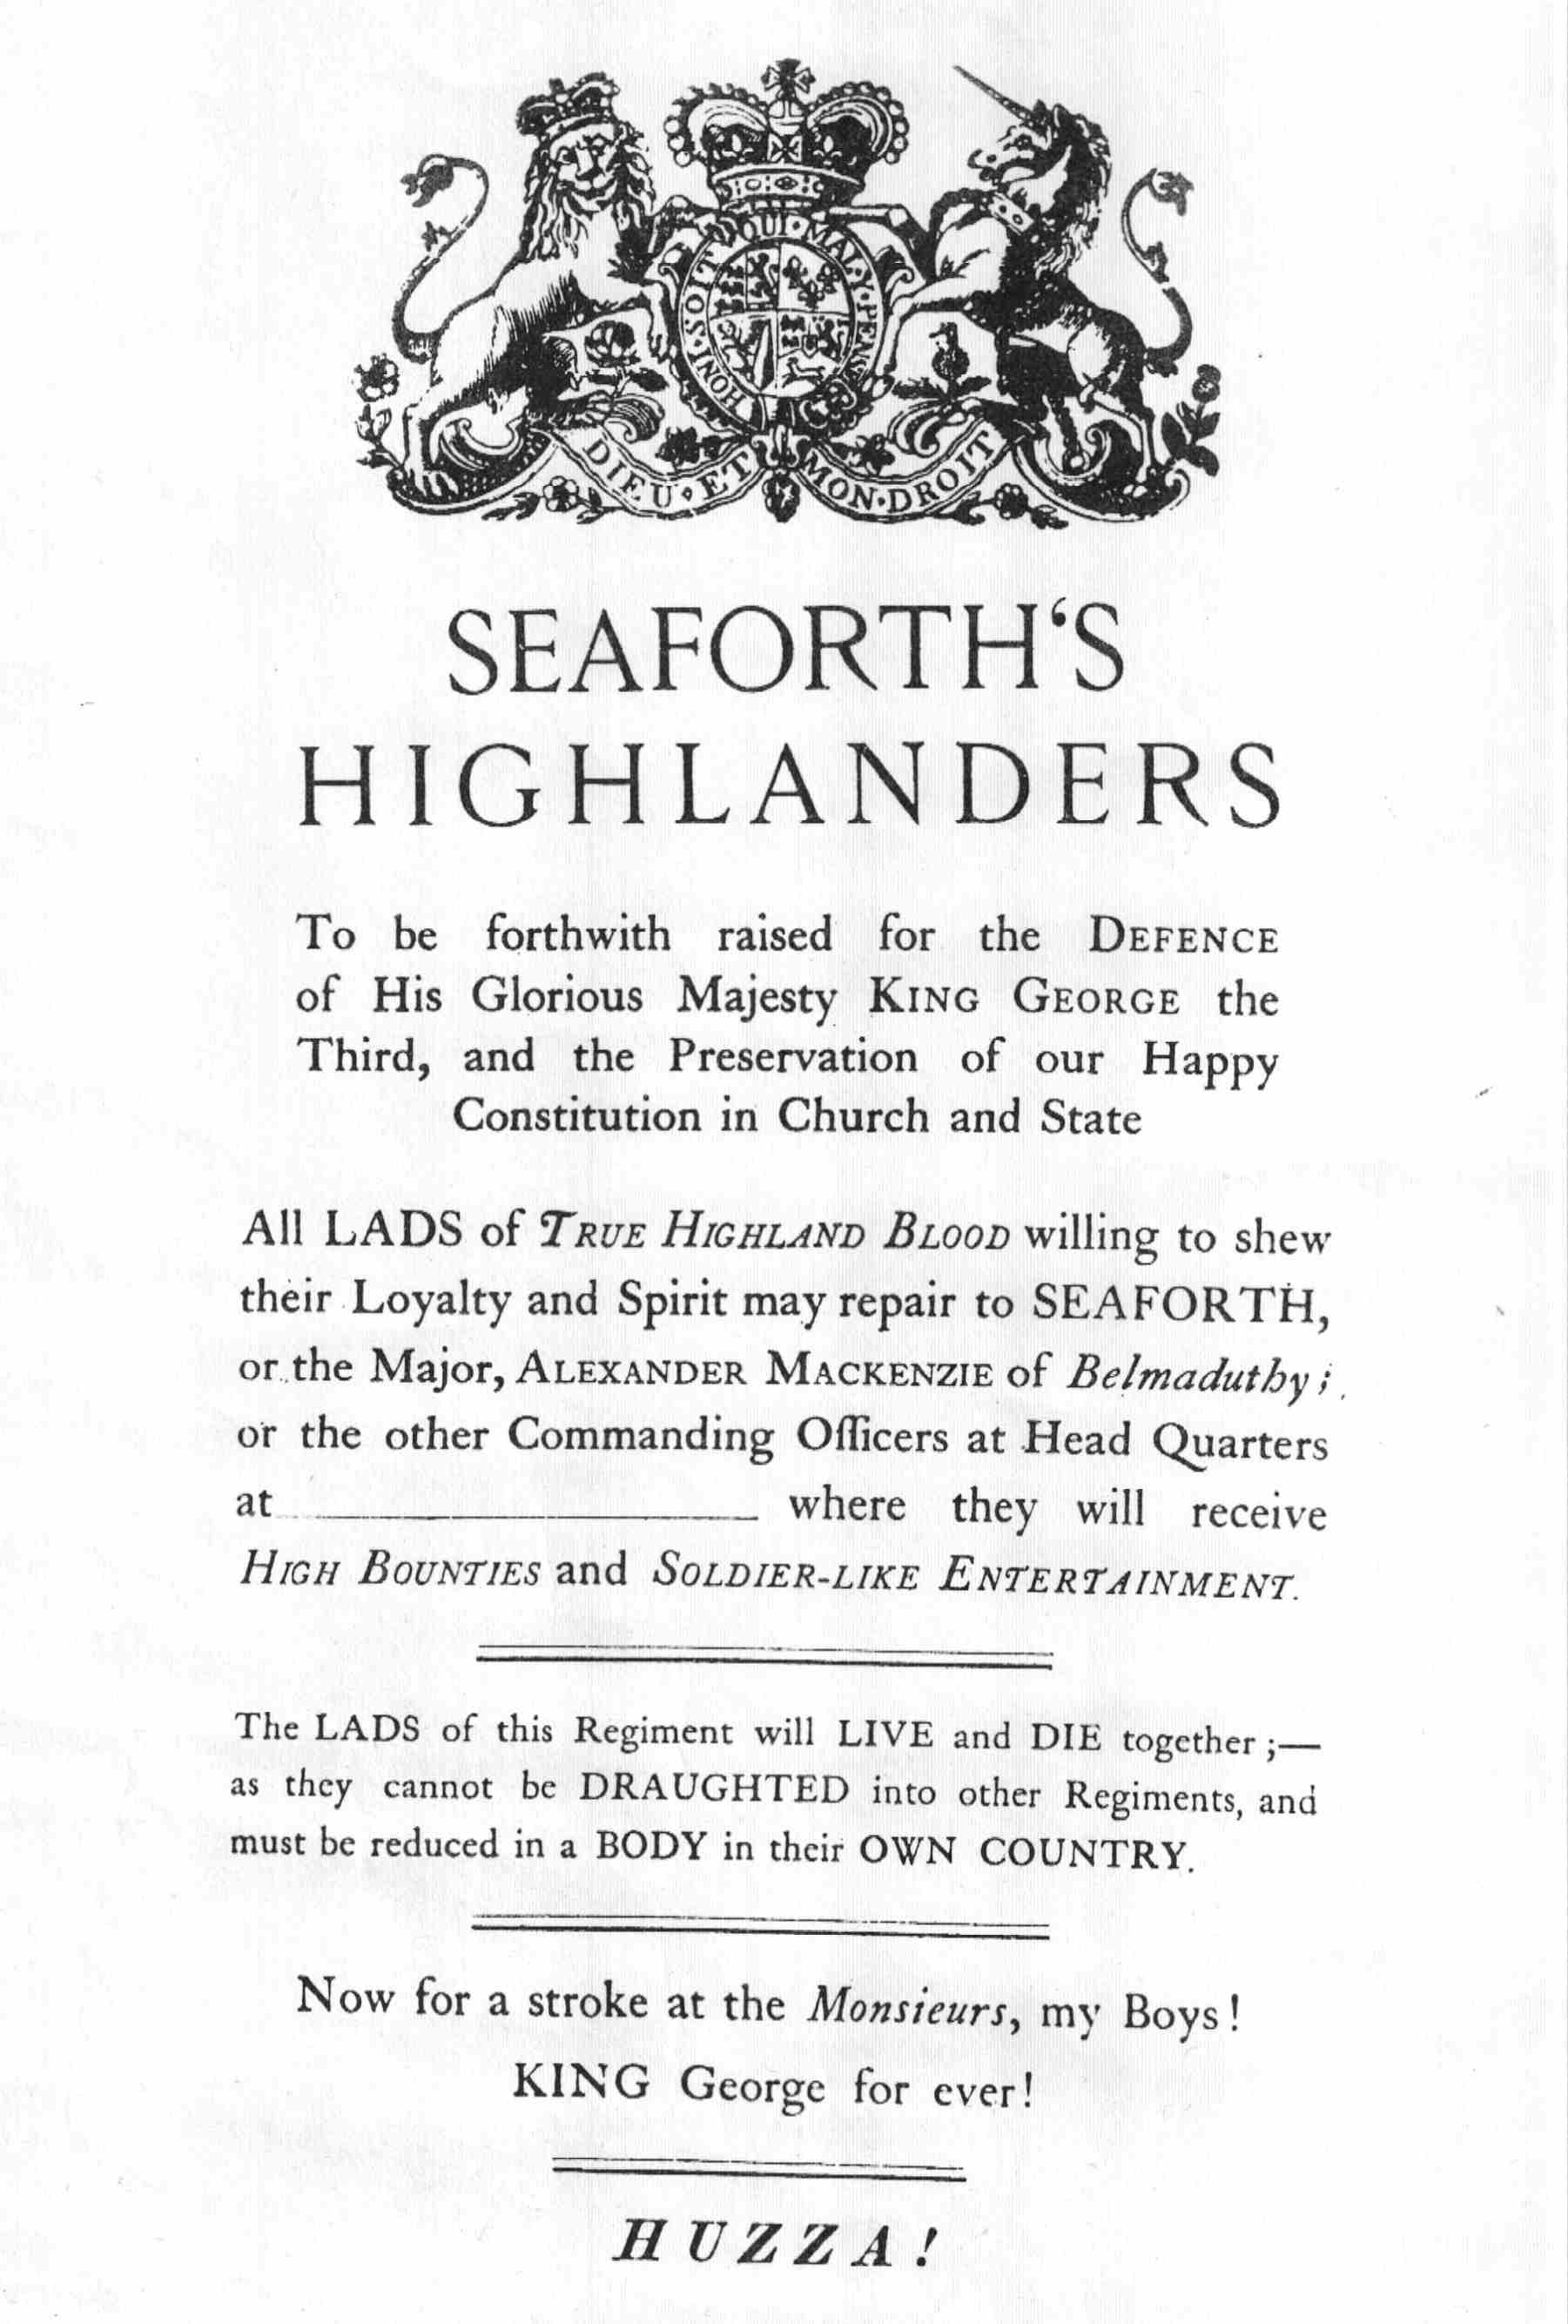 Seaforth Highlanders Recruiting Poster 1793